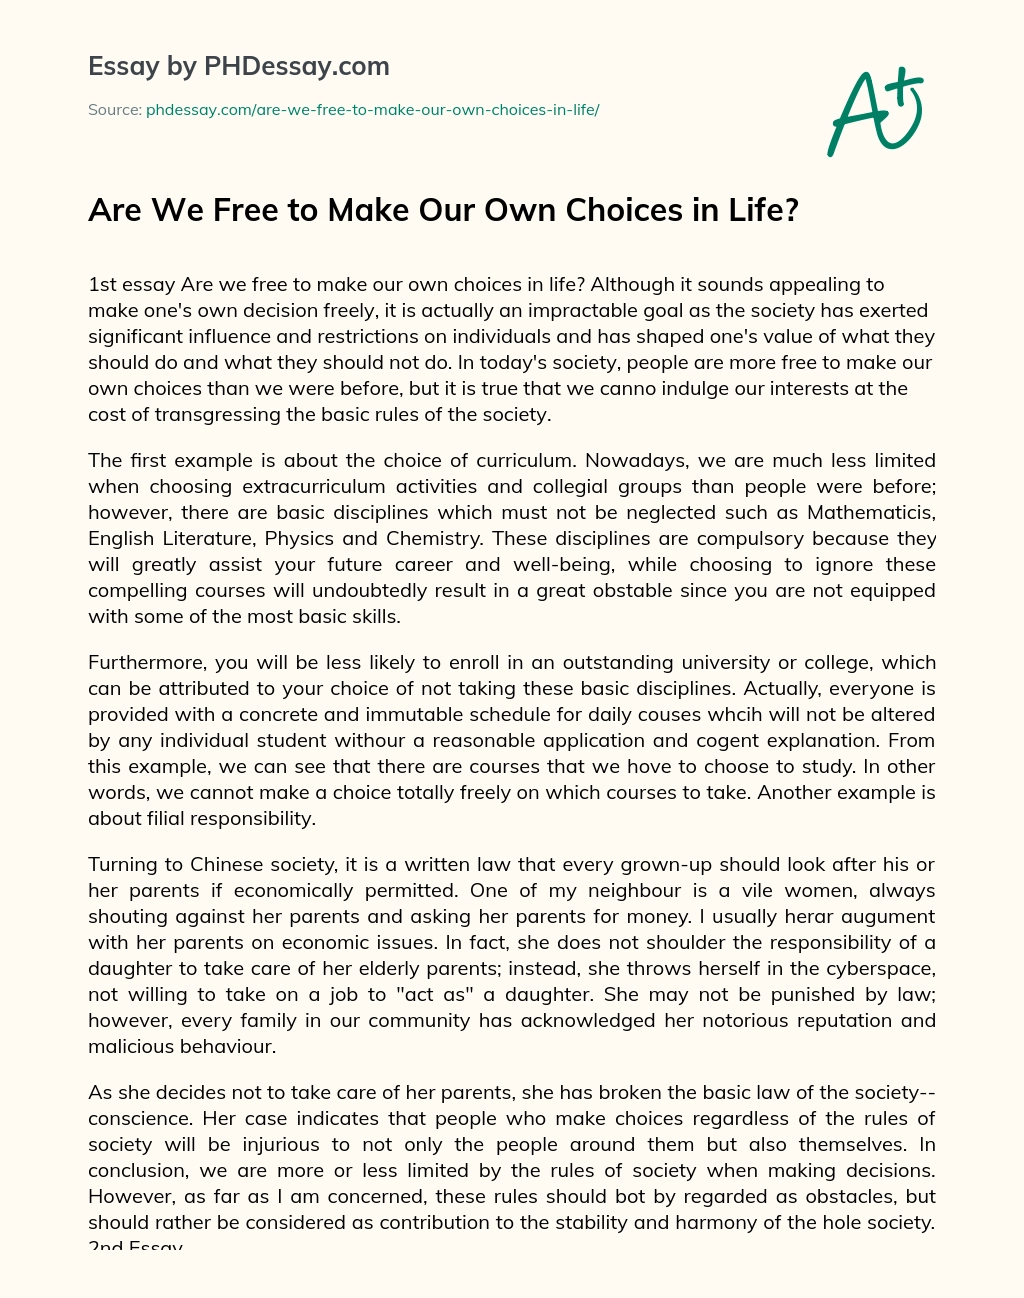 Are We Free to Make Our Own Choices in Life? essay